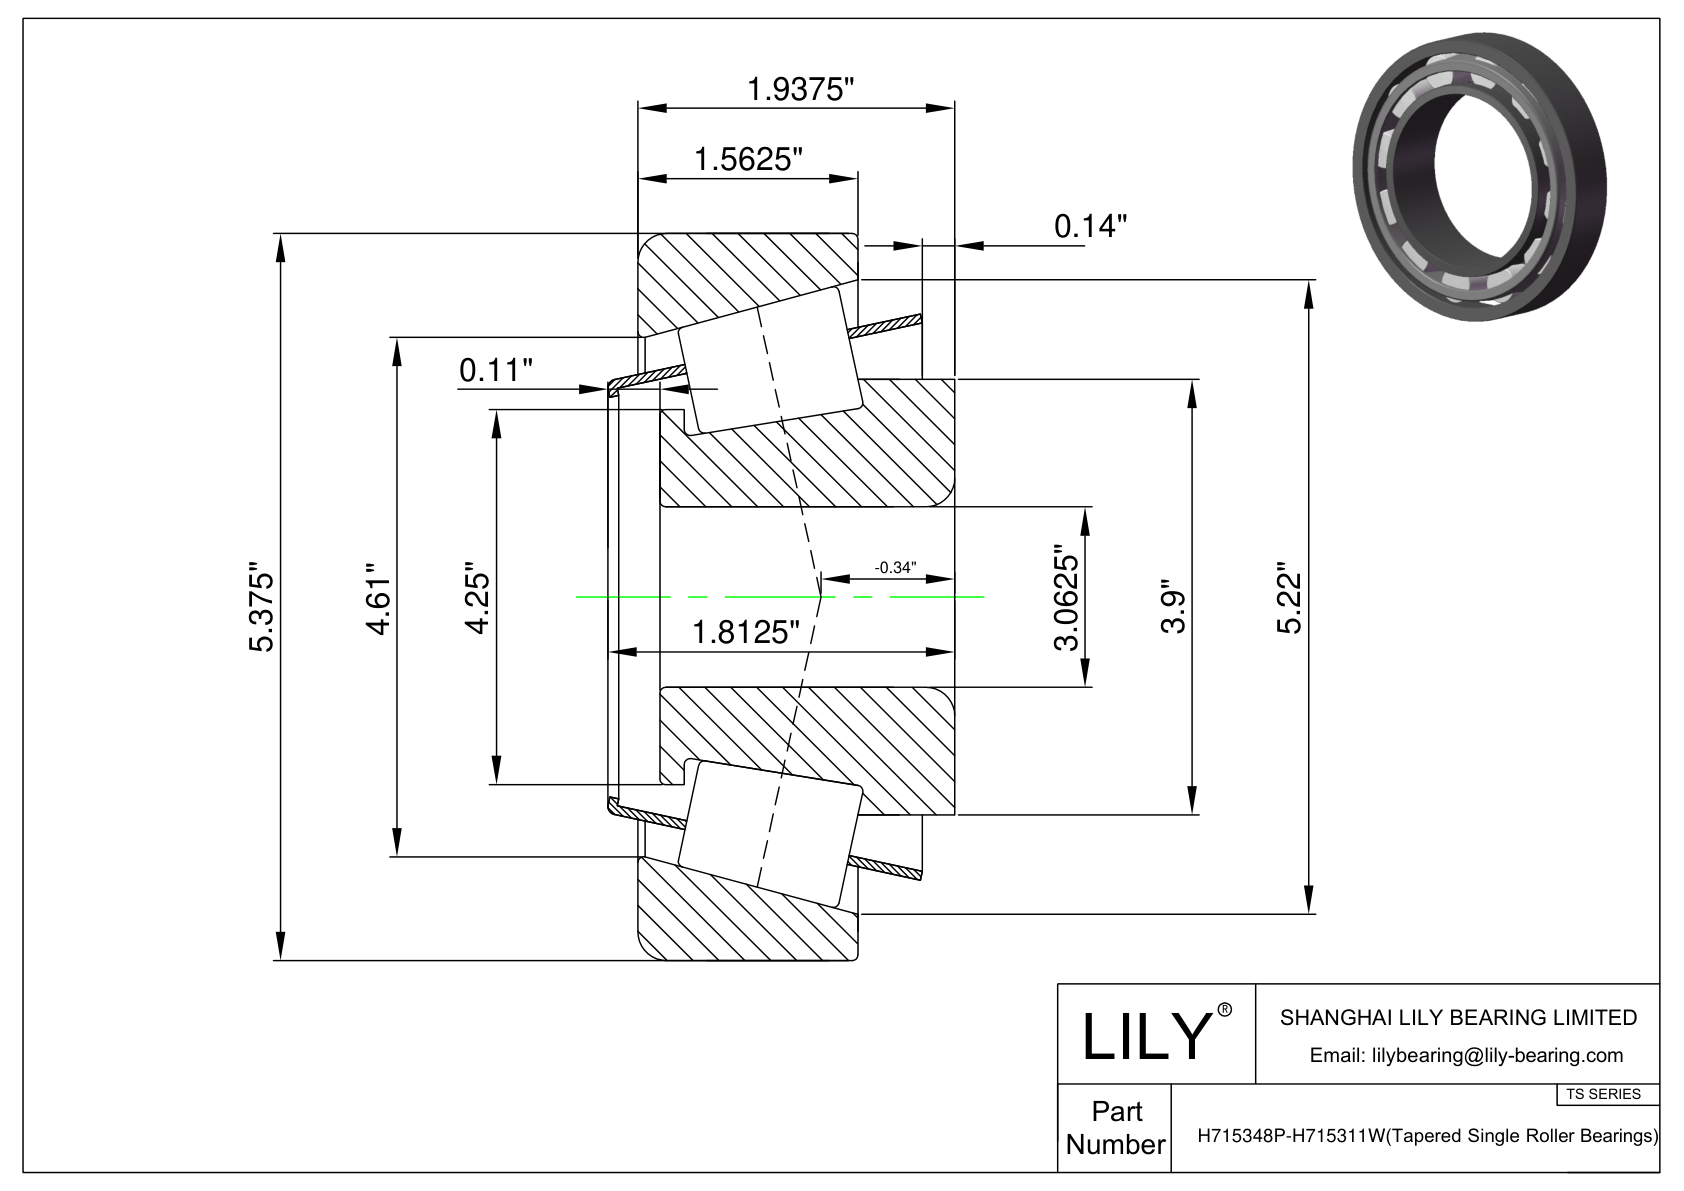 H715348P-H715311W TS (Tapered Single Roller Bearings) (Imperial) cad drawing